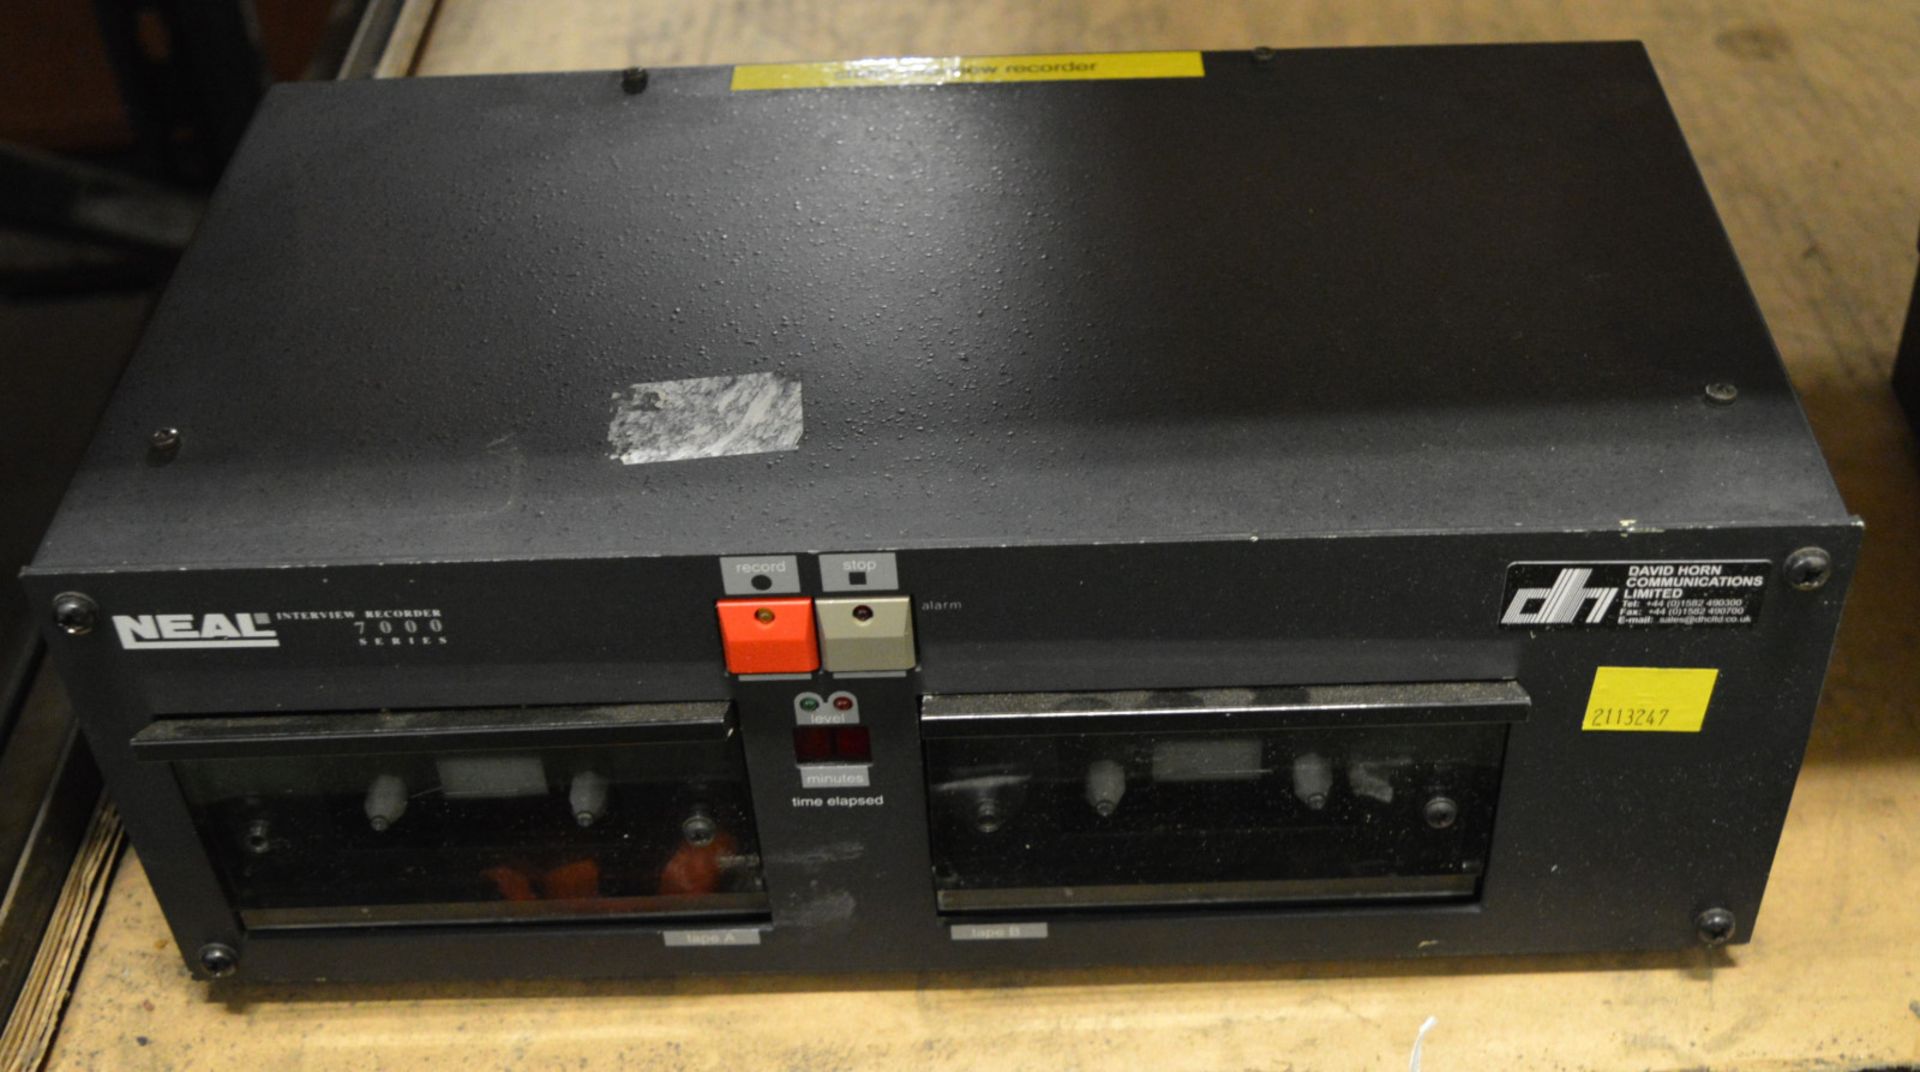 Neal Interview Recorder Model 7224.